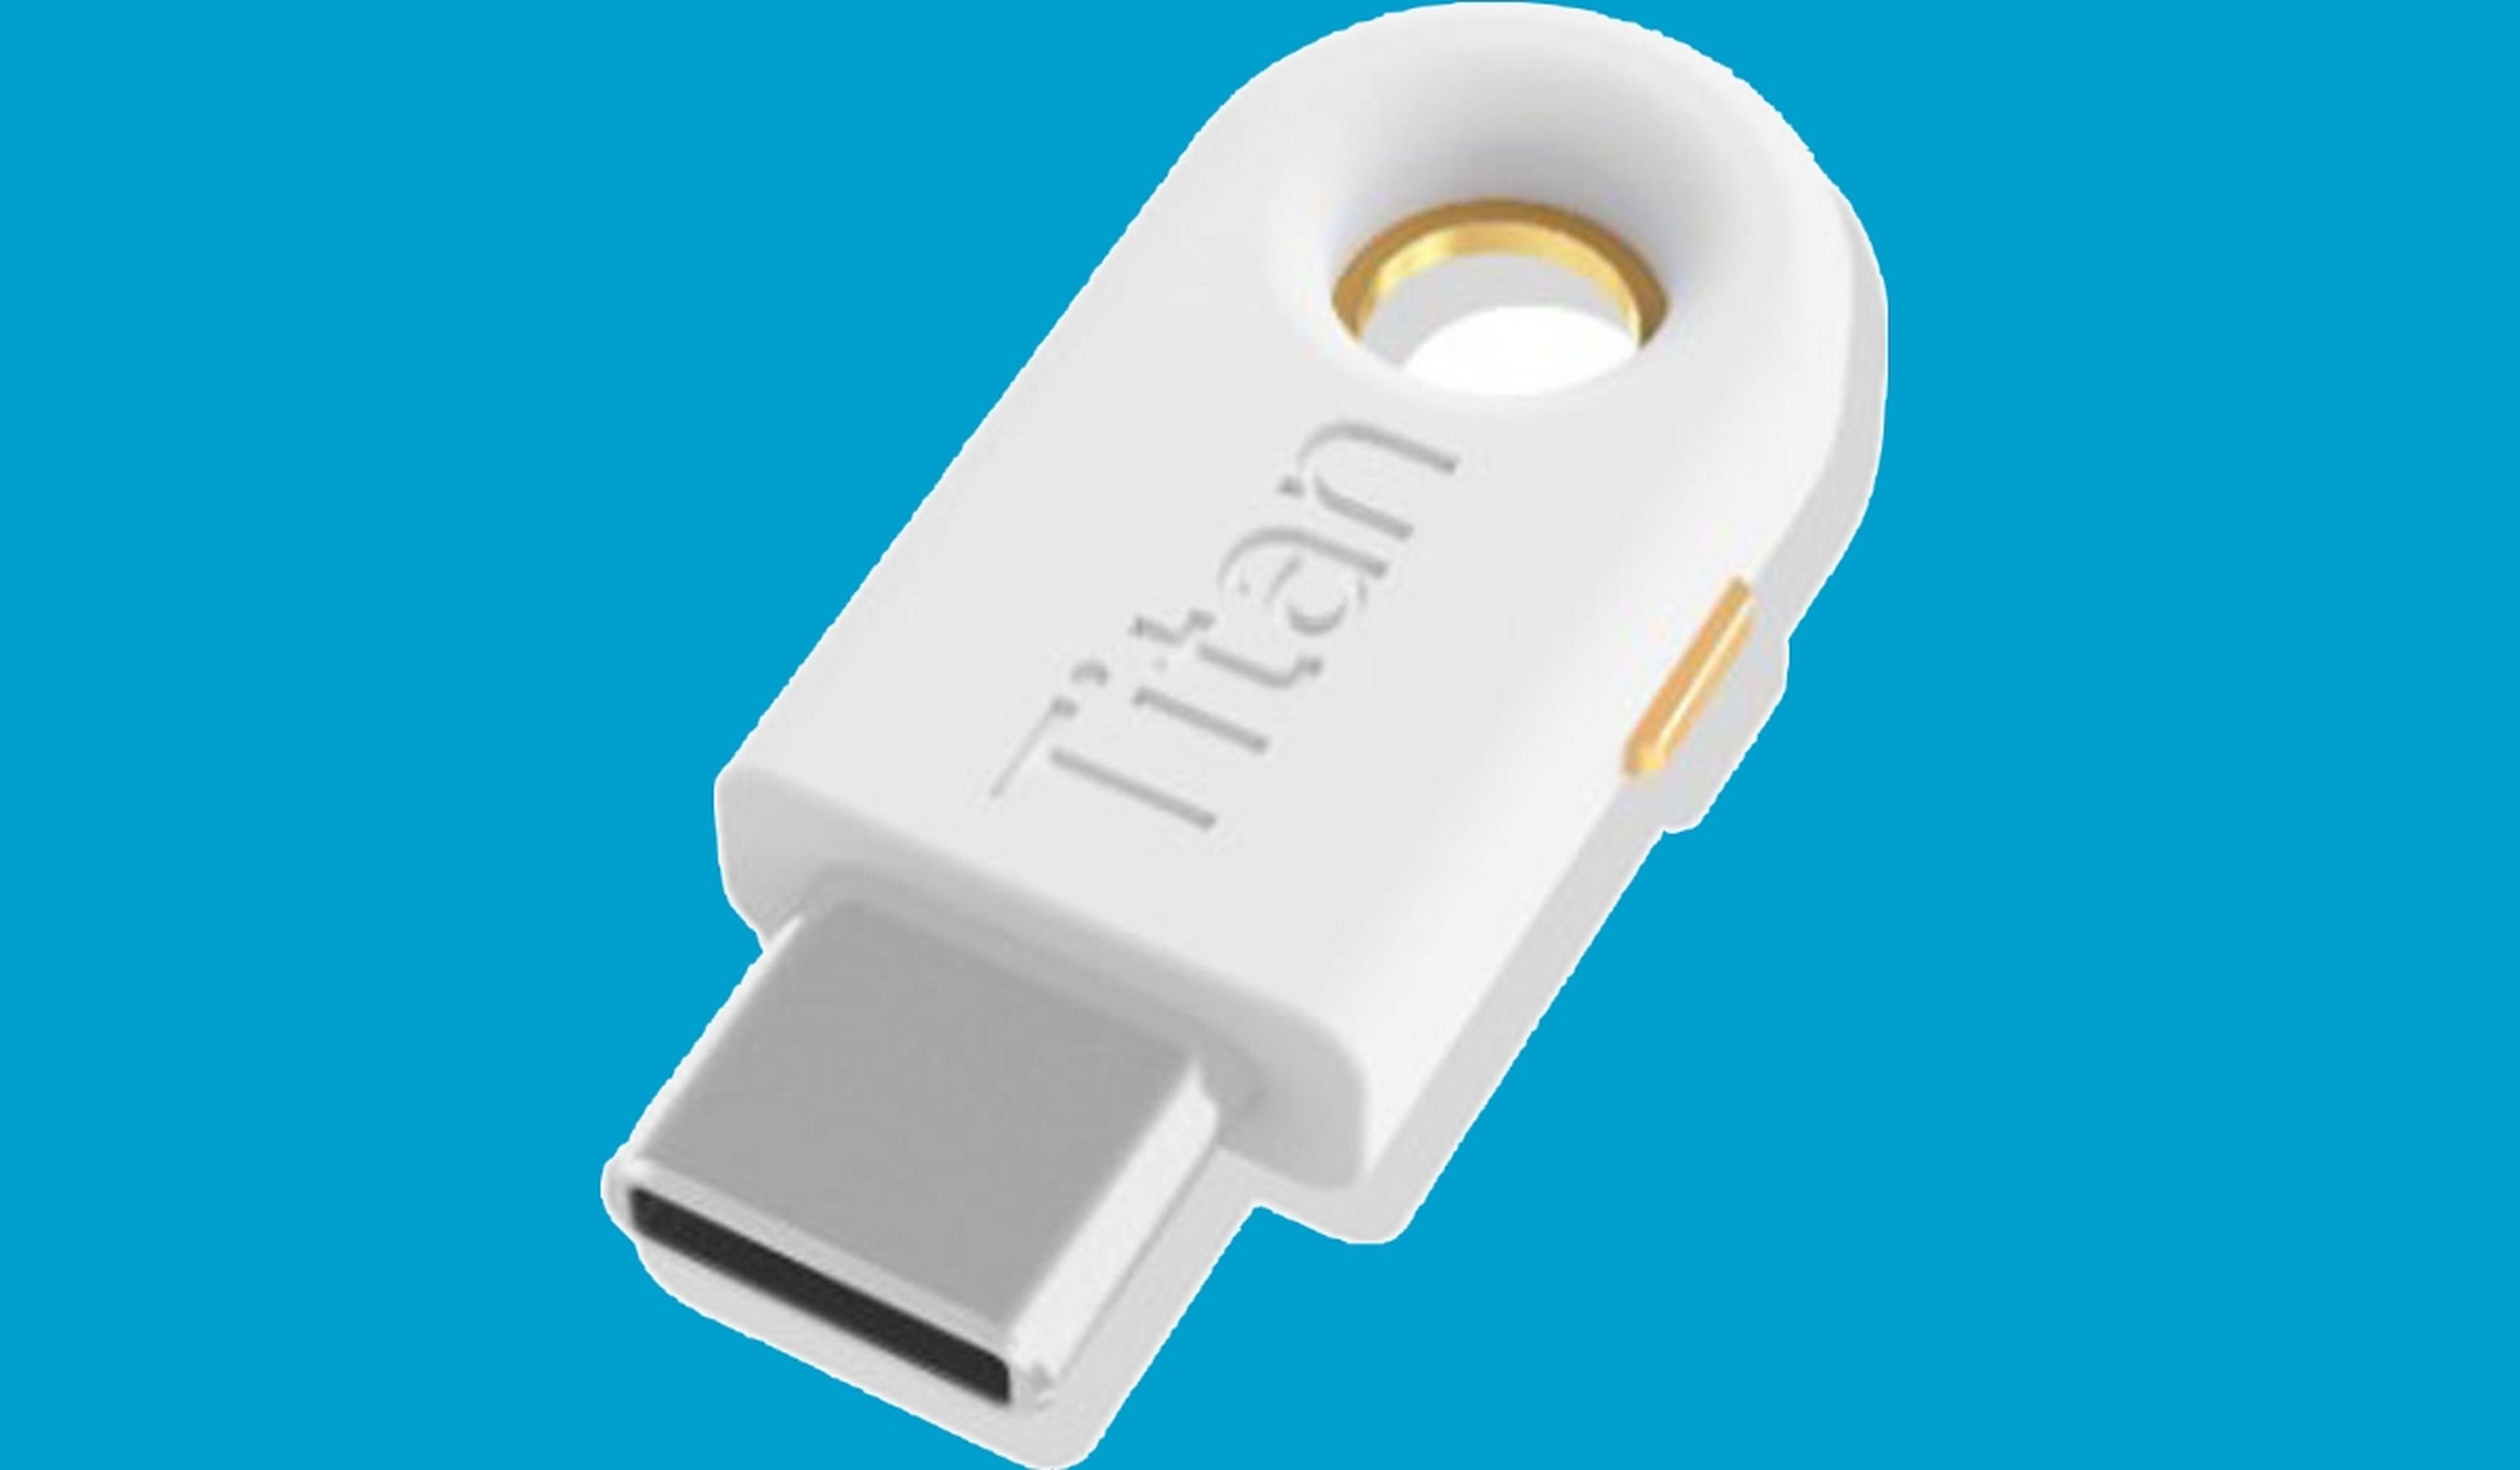 Google launches new Titan security key with USB Type C connector